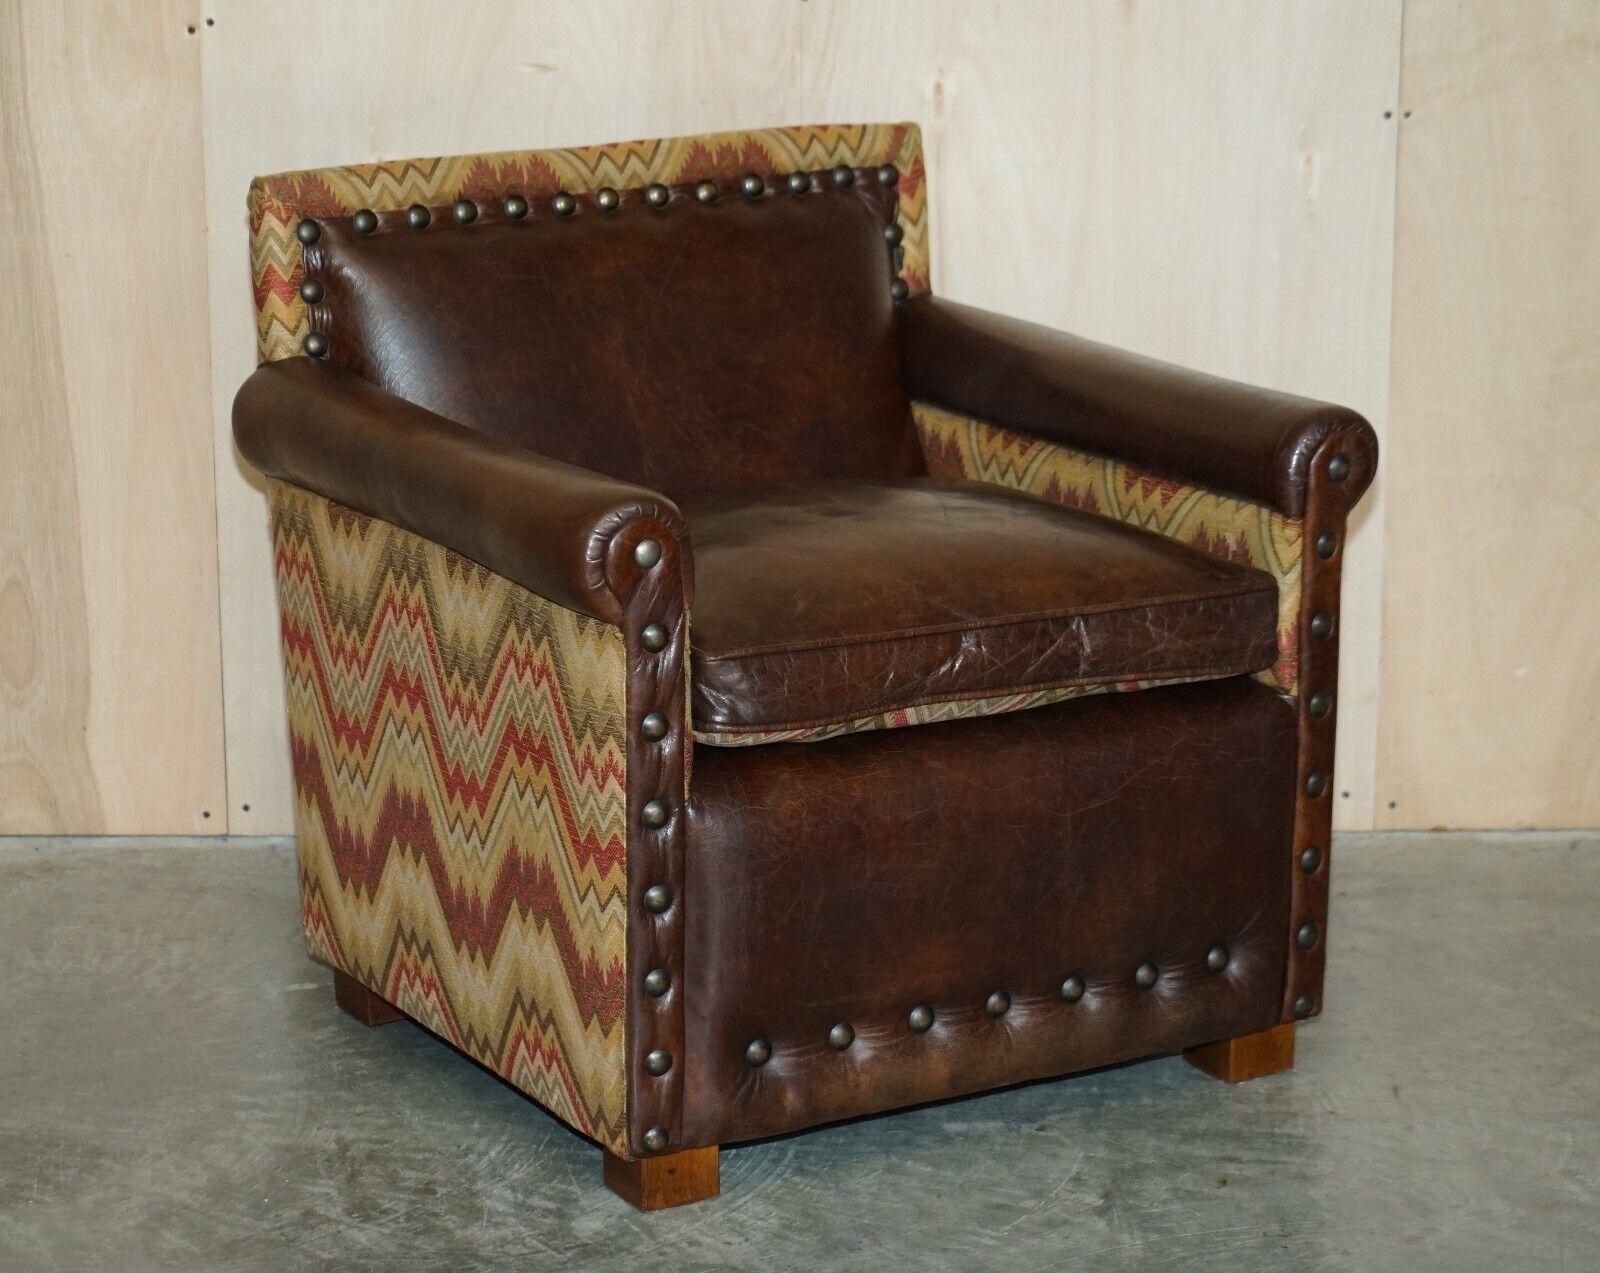 LOVELY PAIR OF ANDREW MARTIN MARLBOROUGH HERITAGE BROWN LEATHER KILIM ARMCHAiRS 3